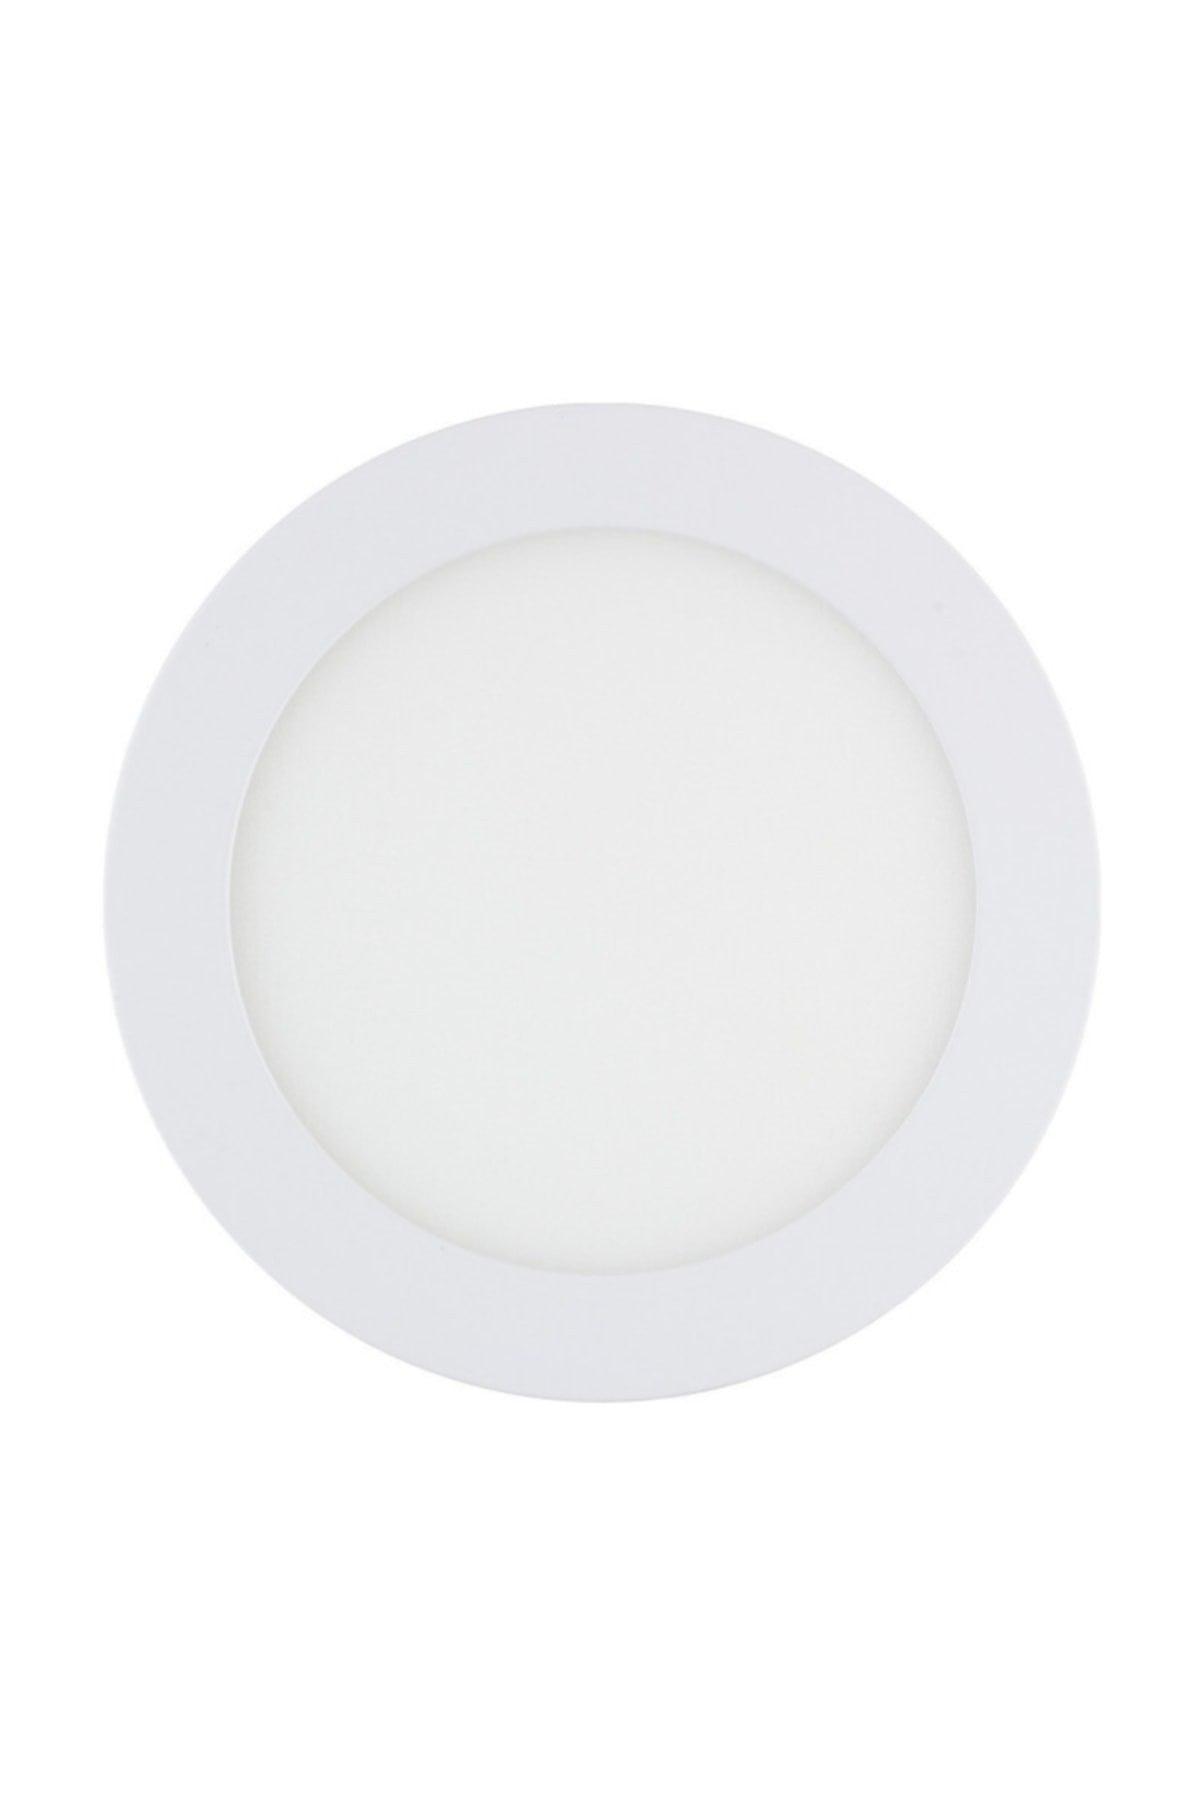 9w Recessed Led Panel Deluxe Natural(5pcs)